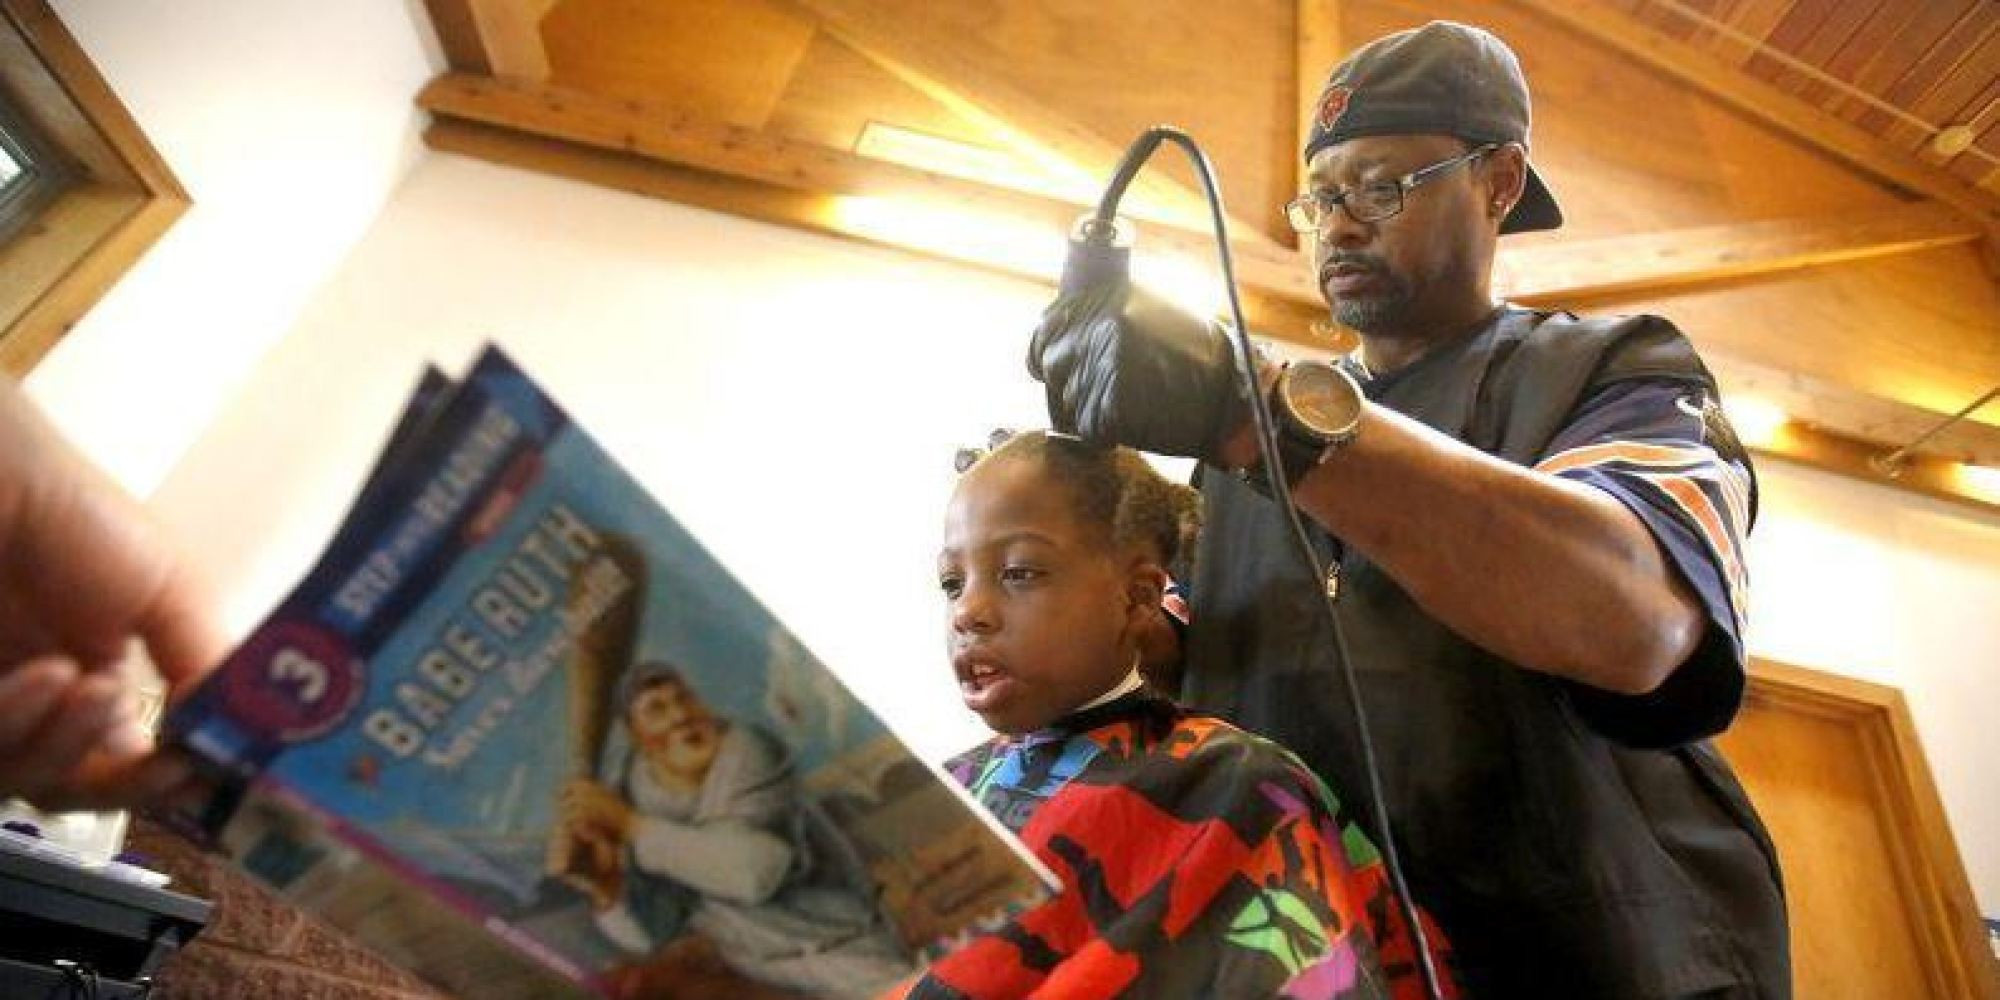 Free Kids Haircuts
 Barber Gives Kids Free Haircuts If They Read Him A Book